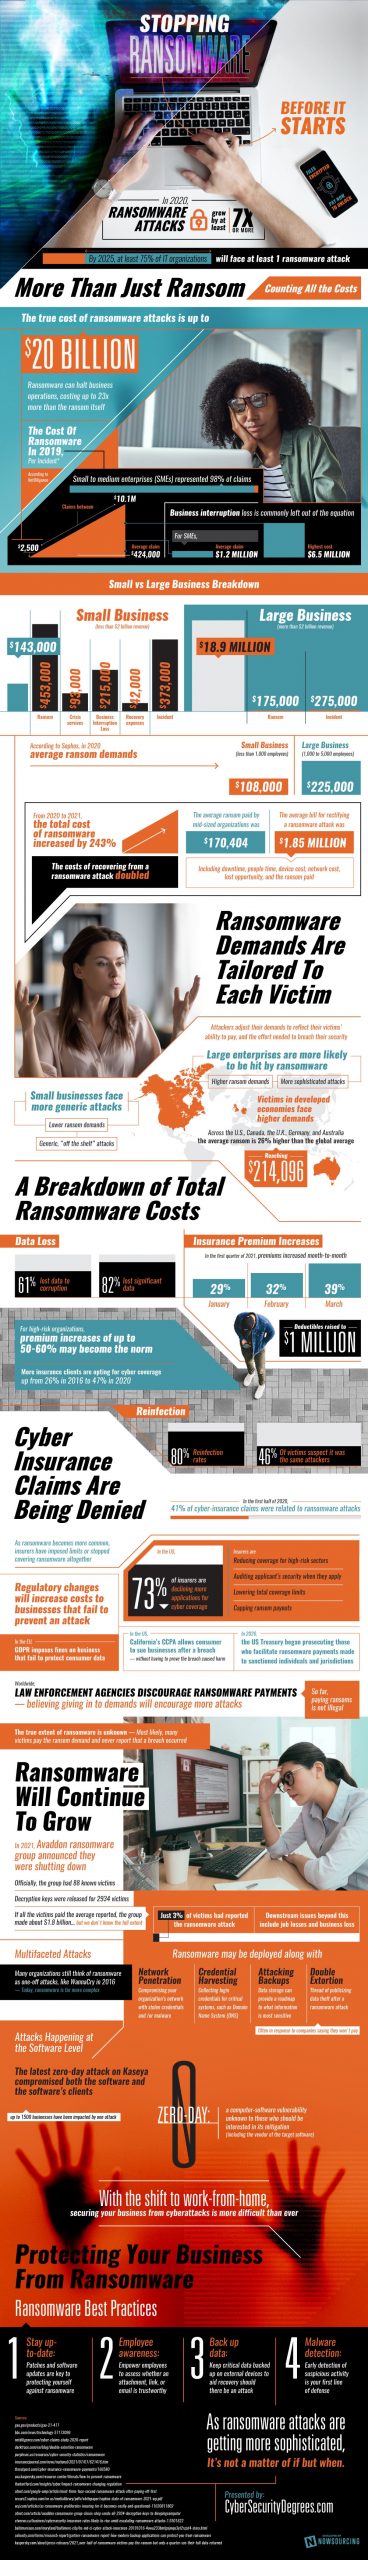 An Emerging Epidemic: Ransomware [Infographic] | DeviceDaily.com